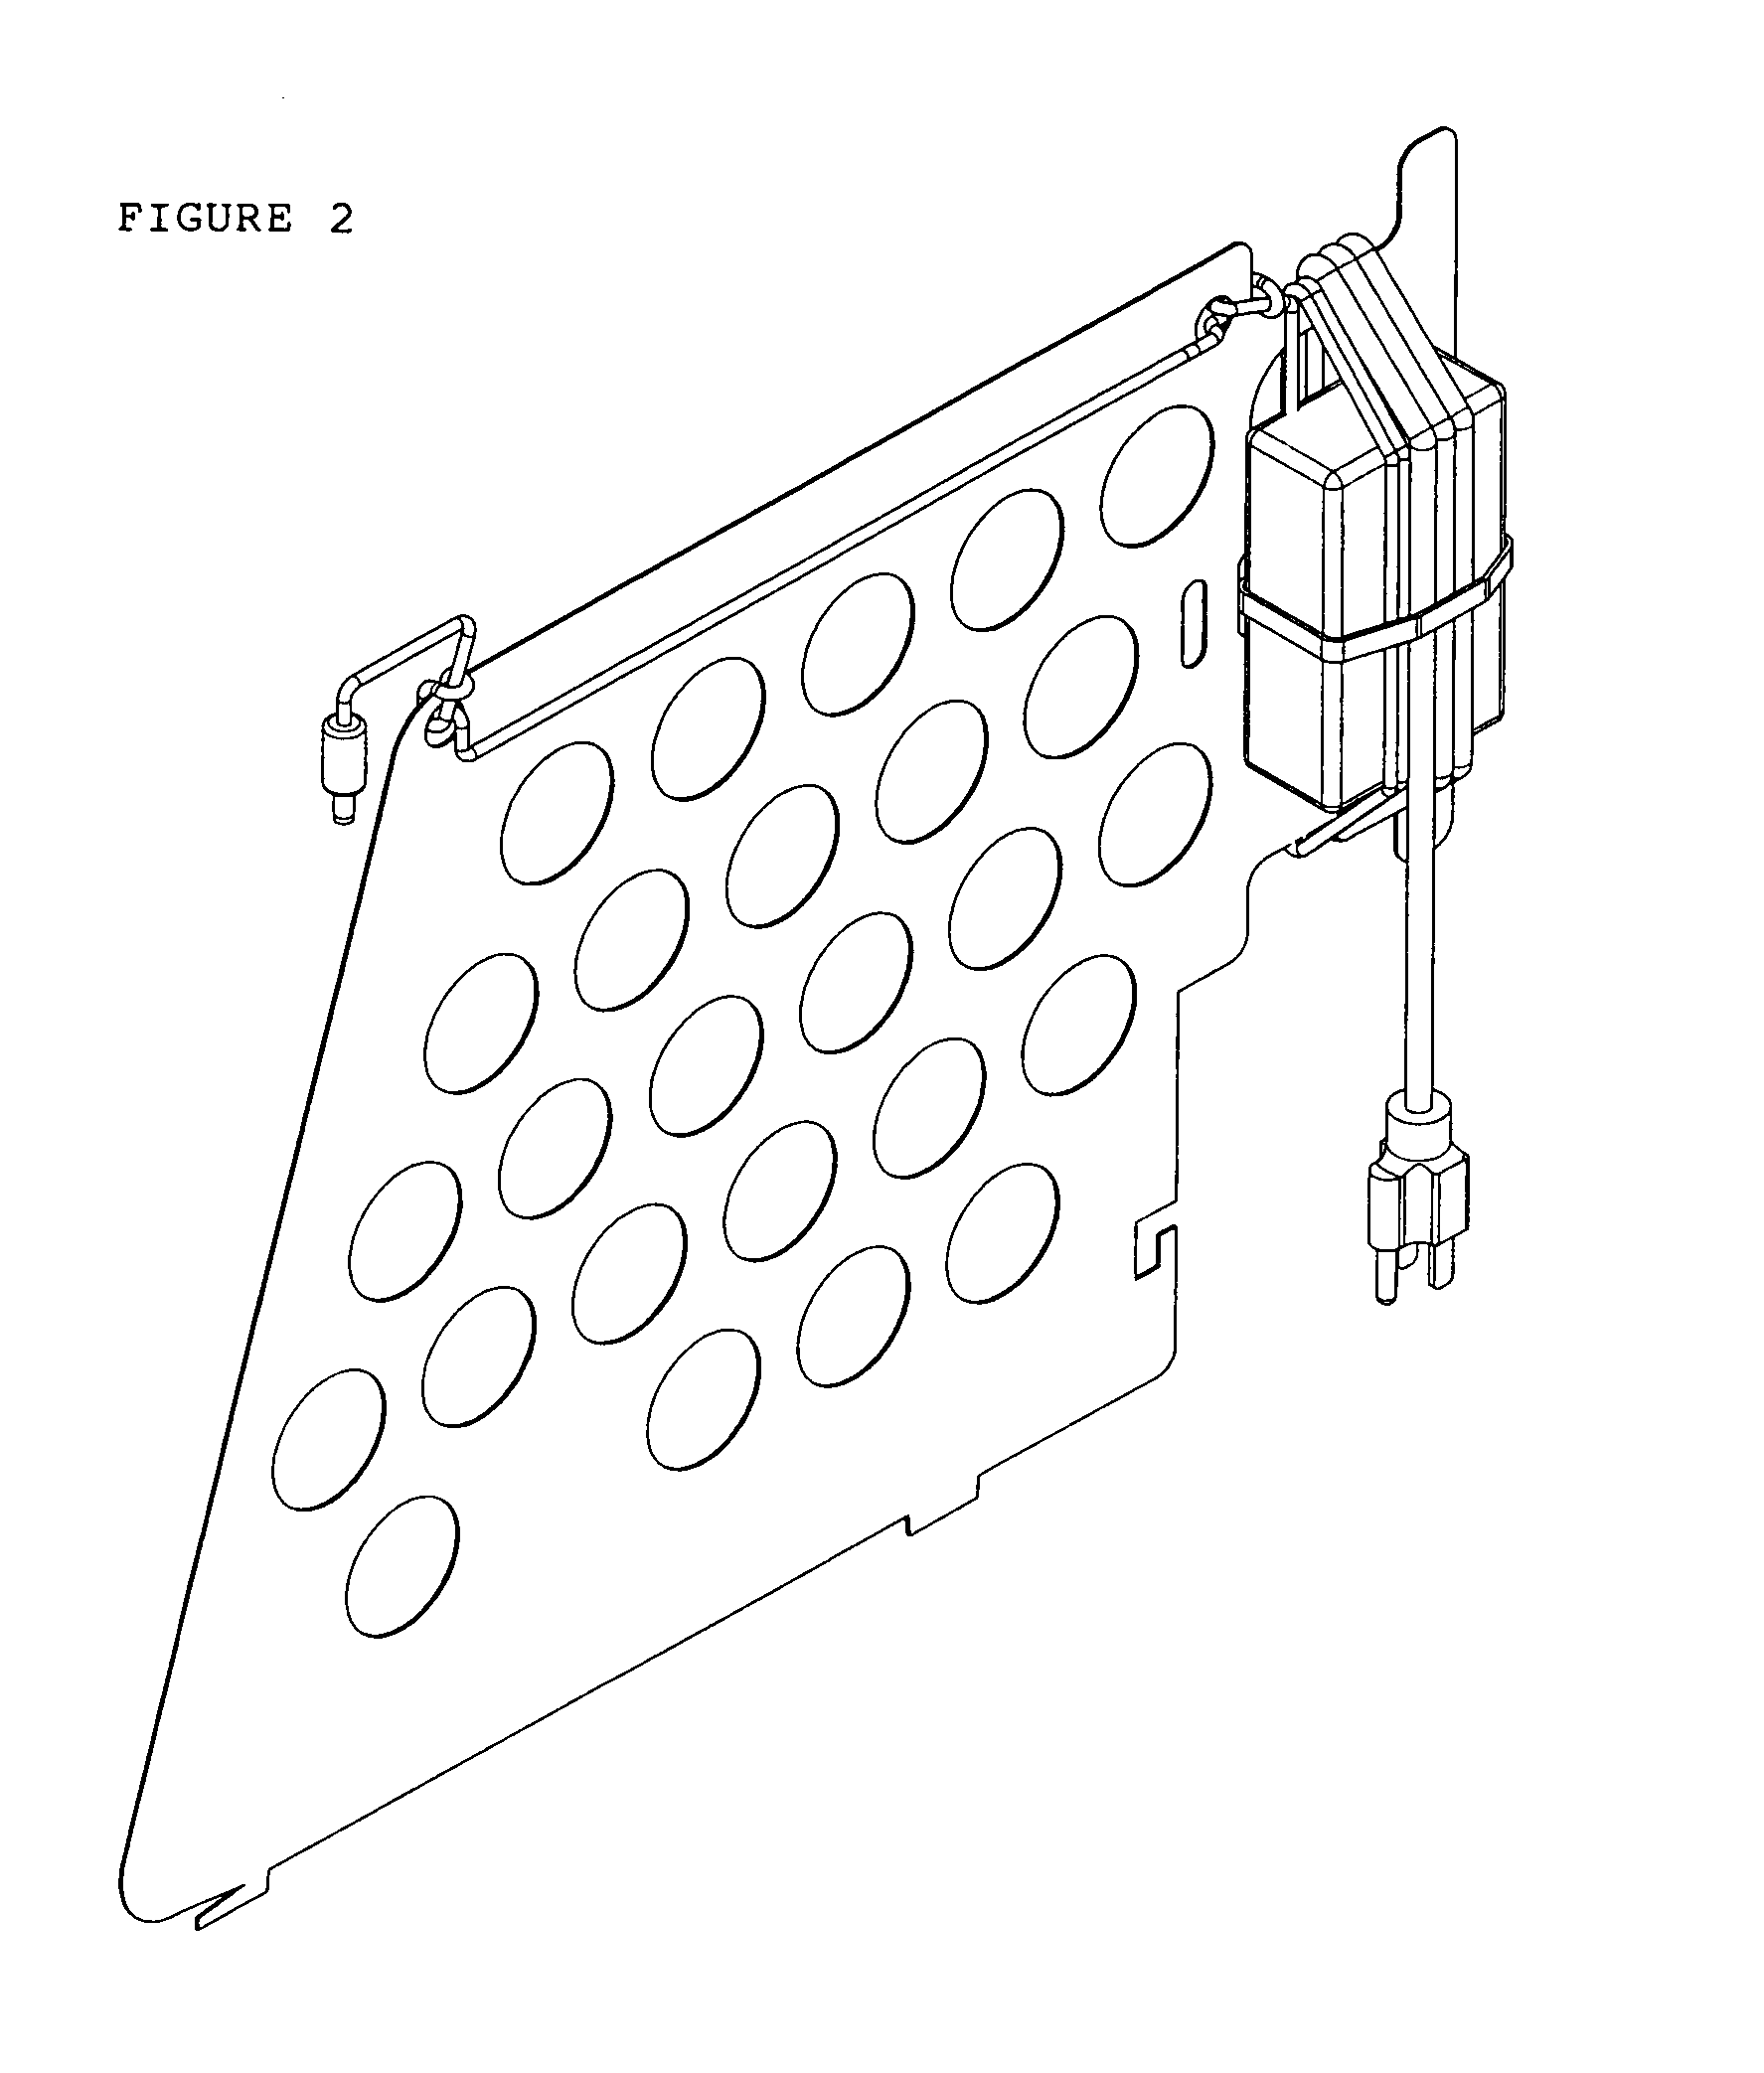 Separator with integrated storage for securing an electrical charging device and providing wire management